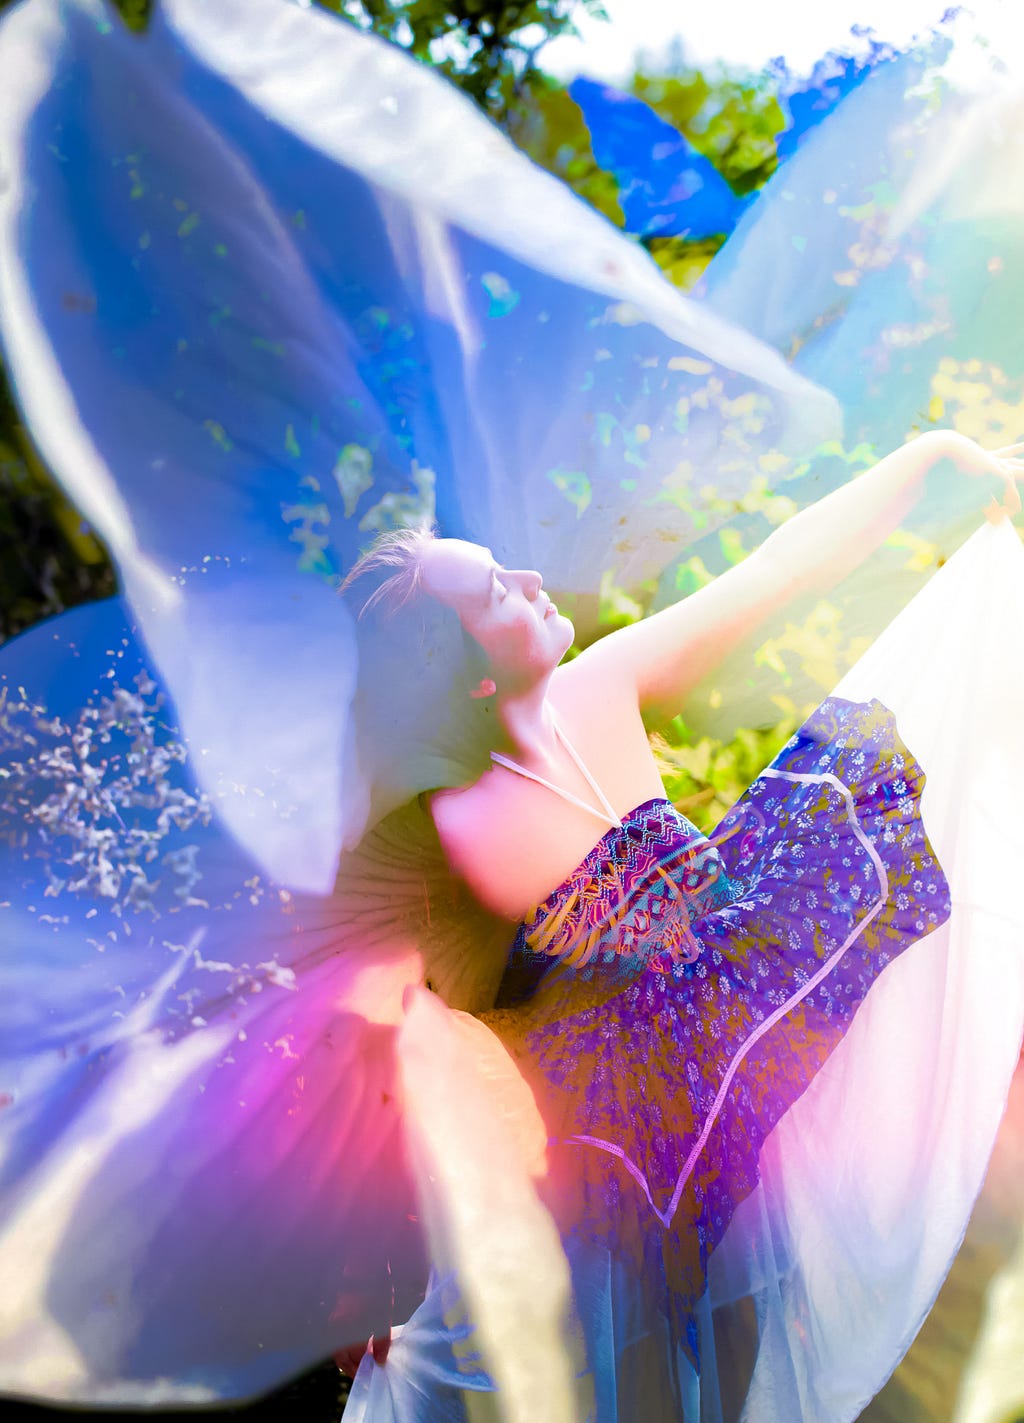 Digital artwork of a woman inside a flower. She is wearing a white and blue dress, and looks a bit like a fairy.